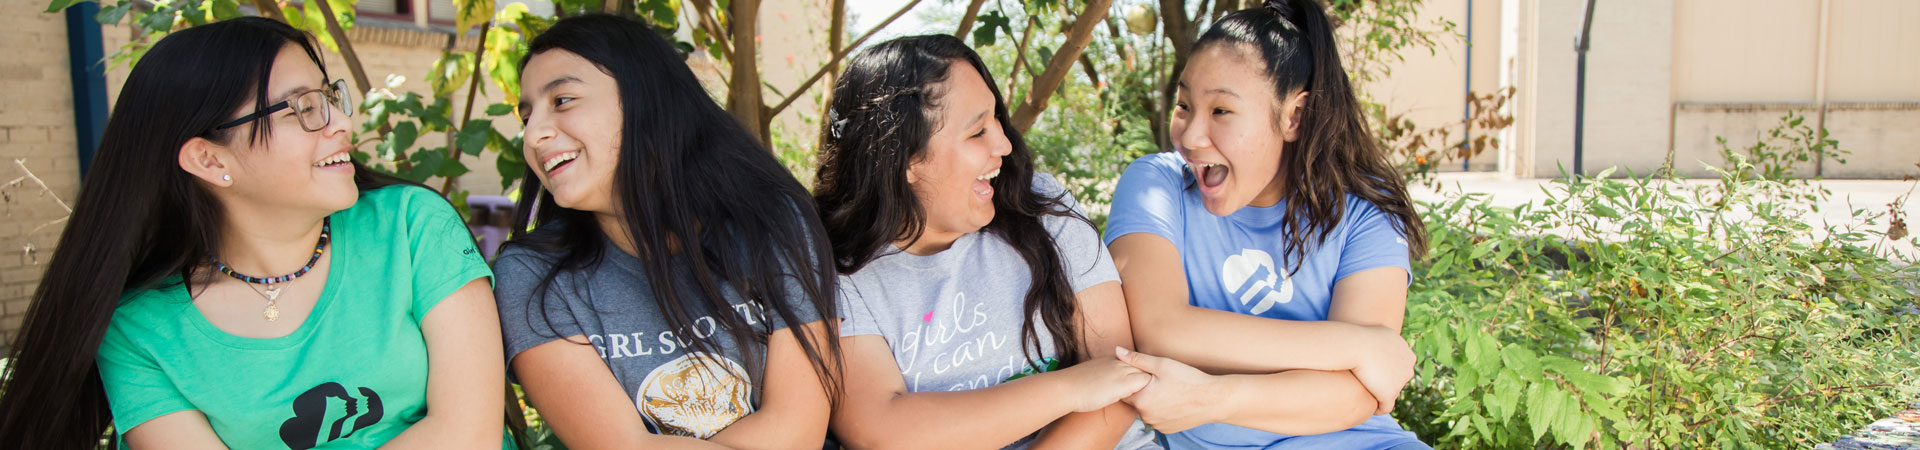  Four Girl Scout alum are sitting outdoors, smiling, with their arms linked. 